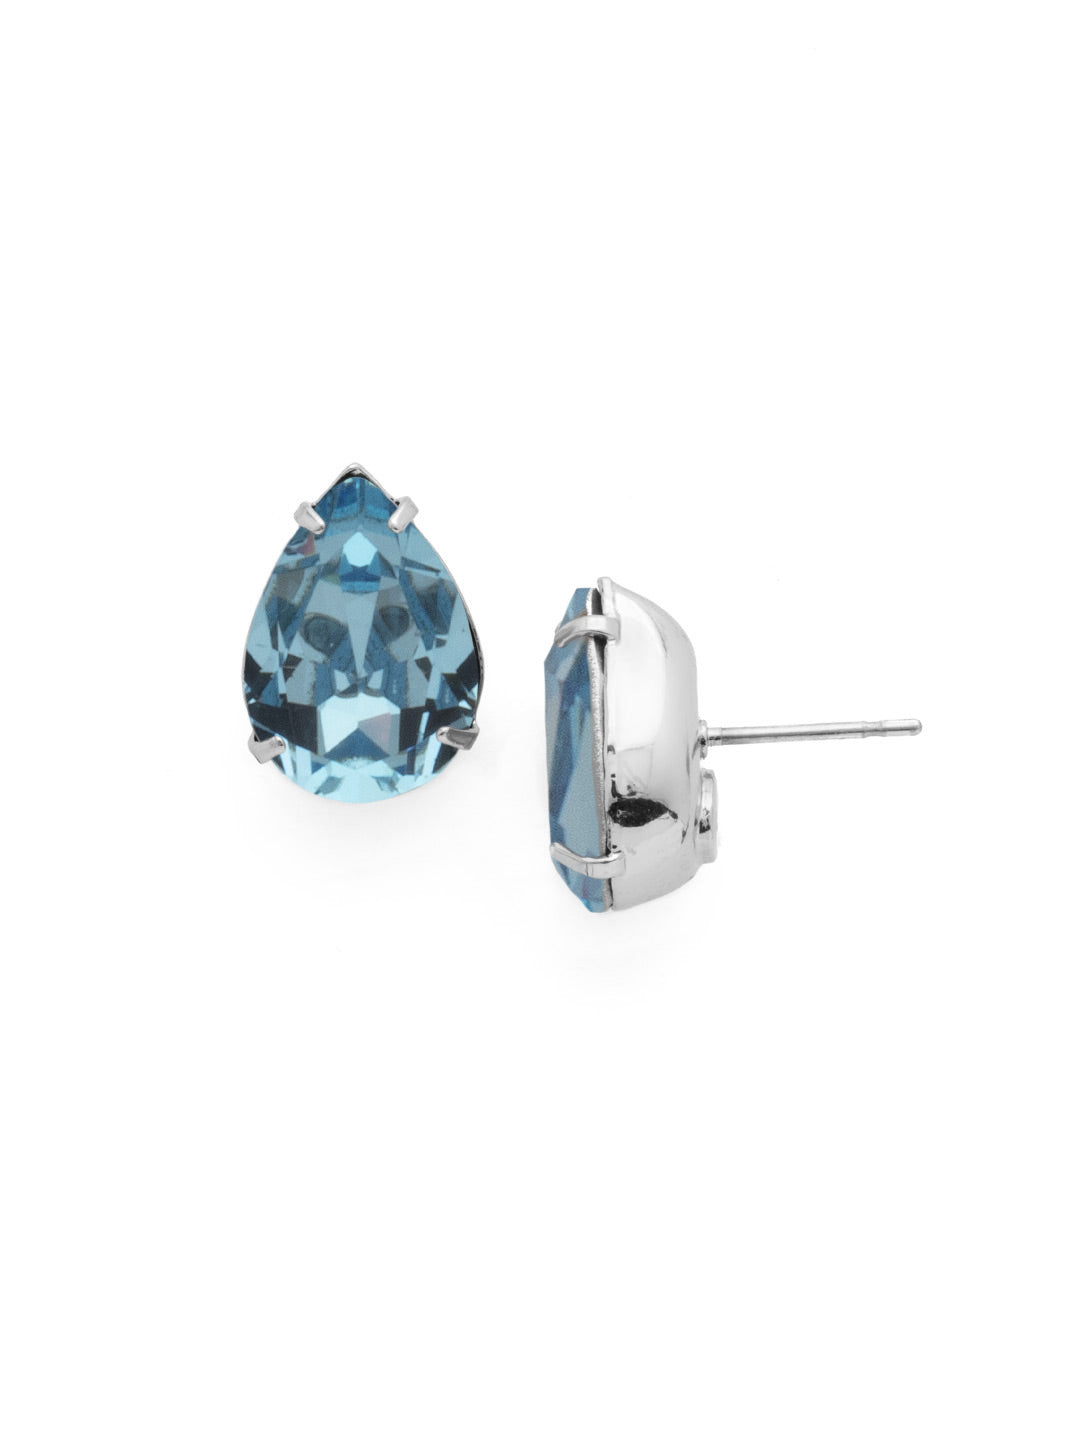 Ginnie Stud Earrings - ECR115PDAQU - <p>A beautiful basic stud. These classic single teardrop post earrings are perfect for any occasion, especially the everyday look. A timeless treasure that will sparkle season after season. From Sorrelli's Aquamarine collection in our Palladium finish.</p>